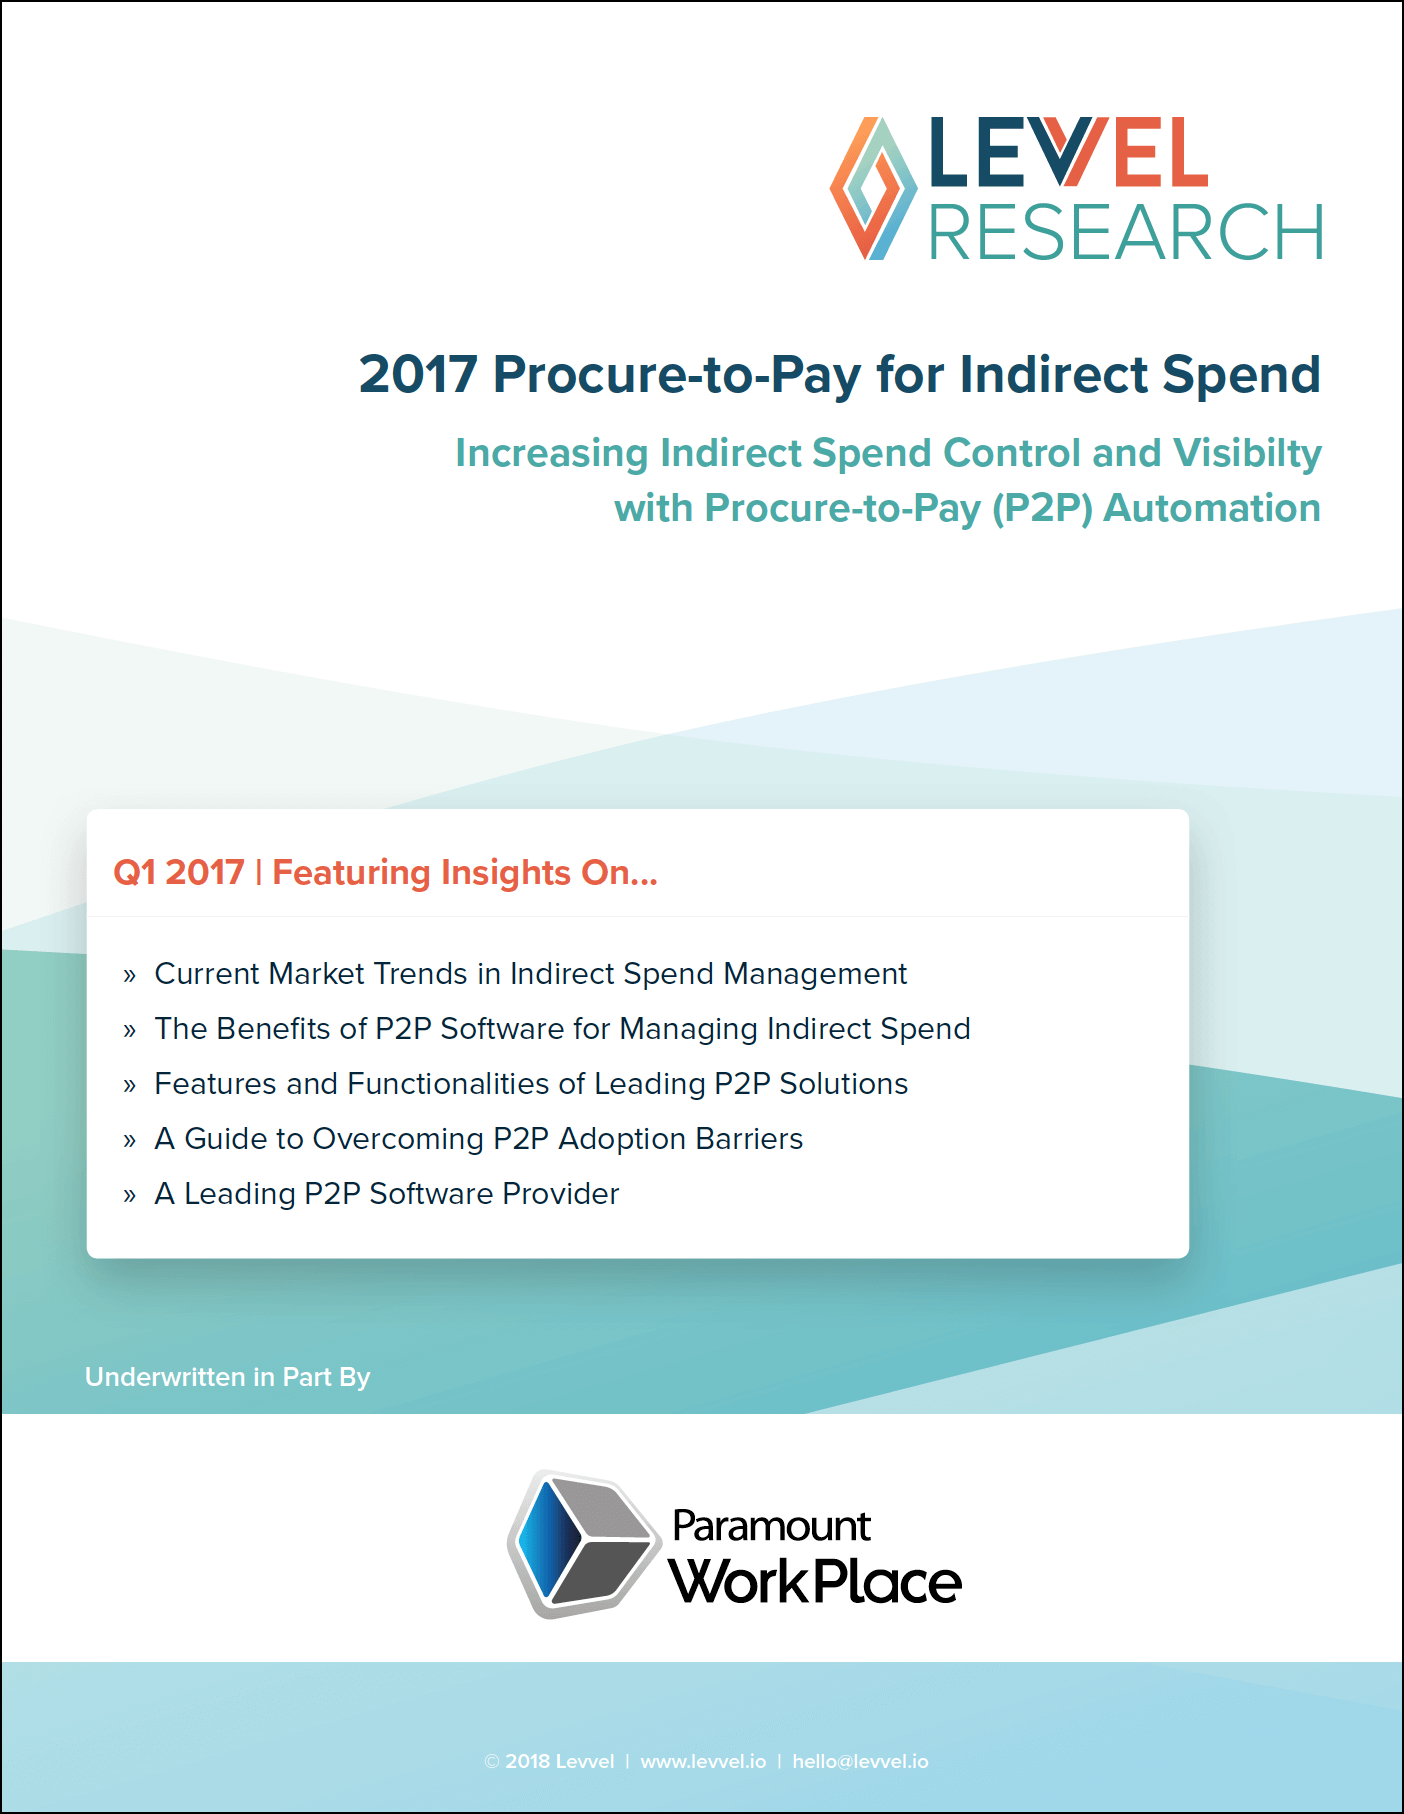 2017 Procure-to-Pay for Indirect Spend